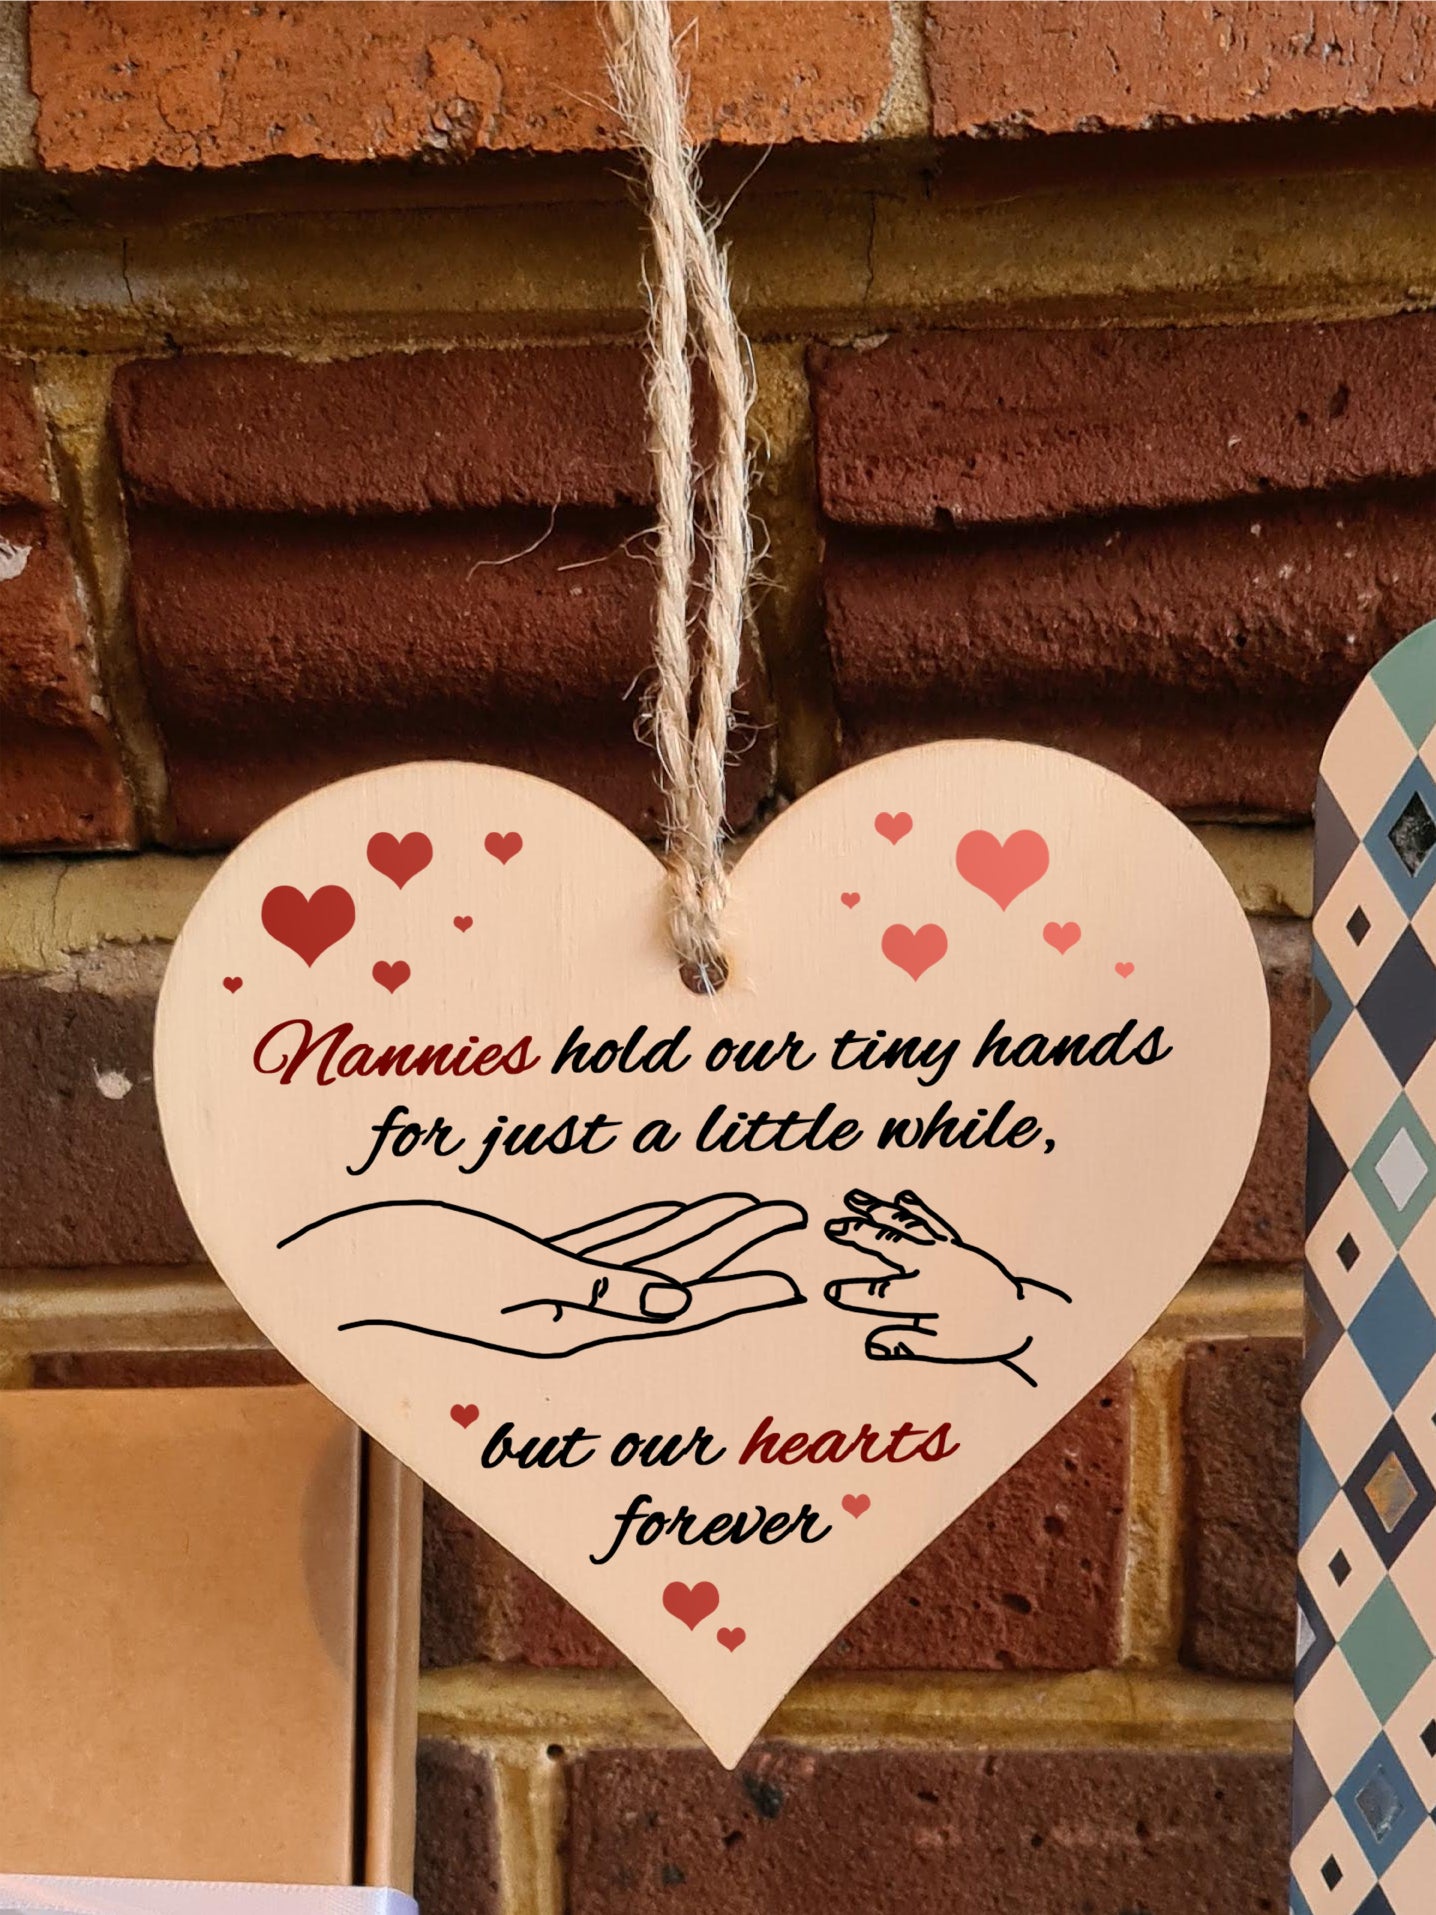 Handmade Wooden Hanging Heart Plaque Gift for Nannies from Kids Babies Thoughtful Keepsake